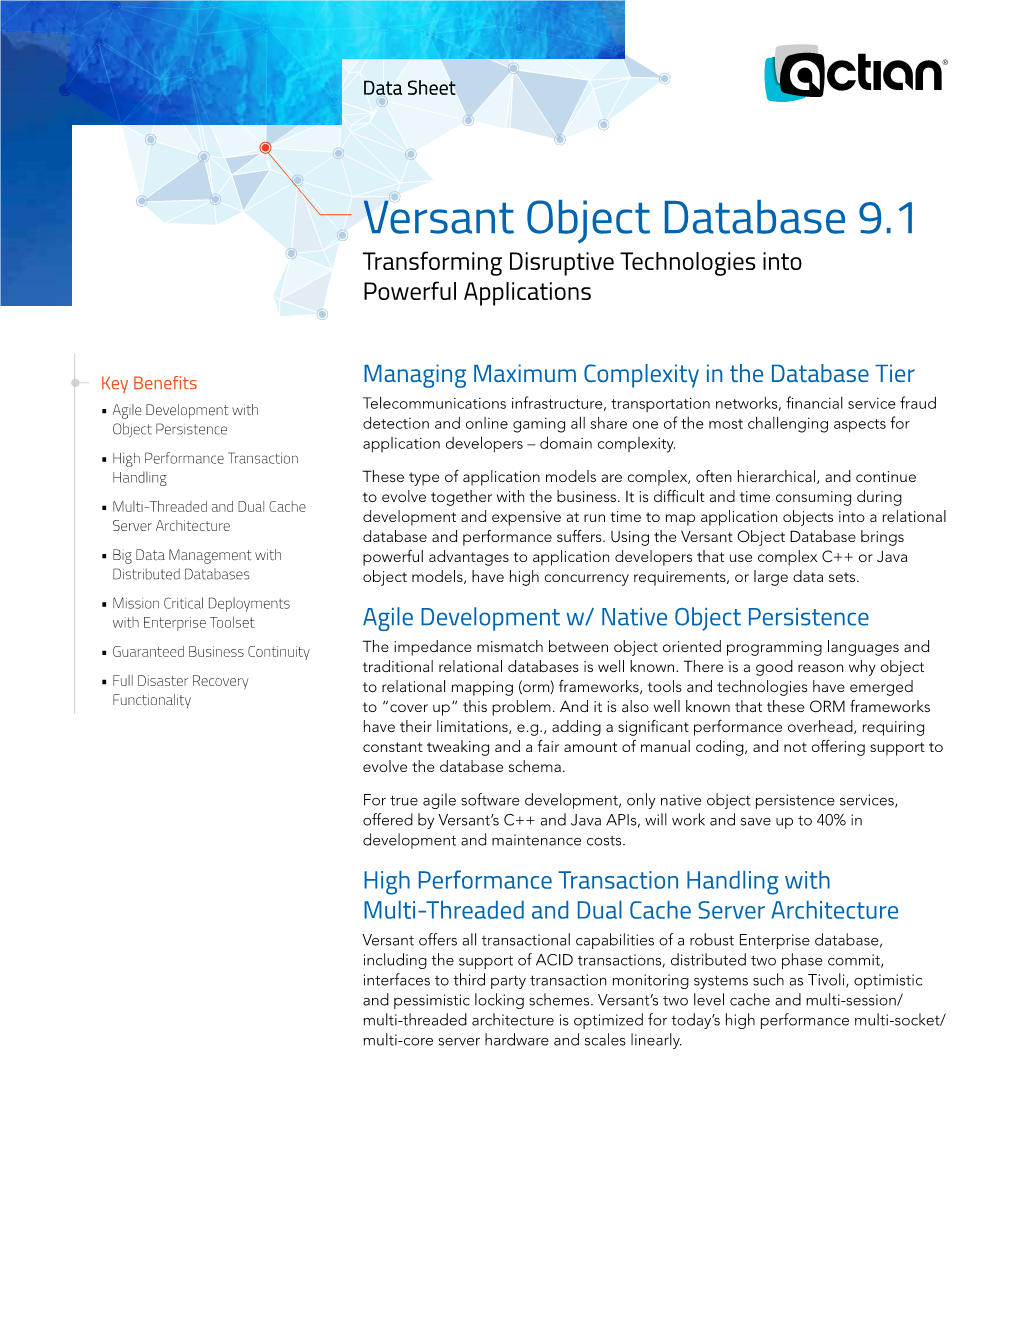 Versant Object Database 9.1 Transforming Disruptive Technologies Into Powerful Applications